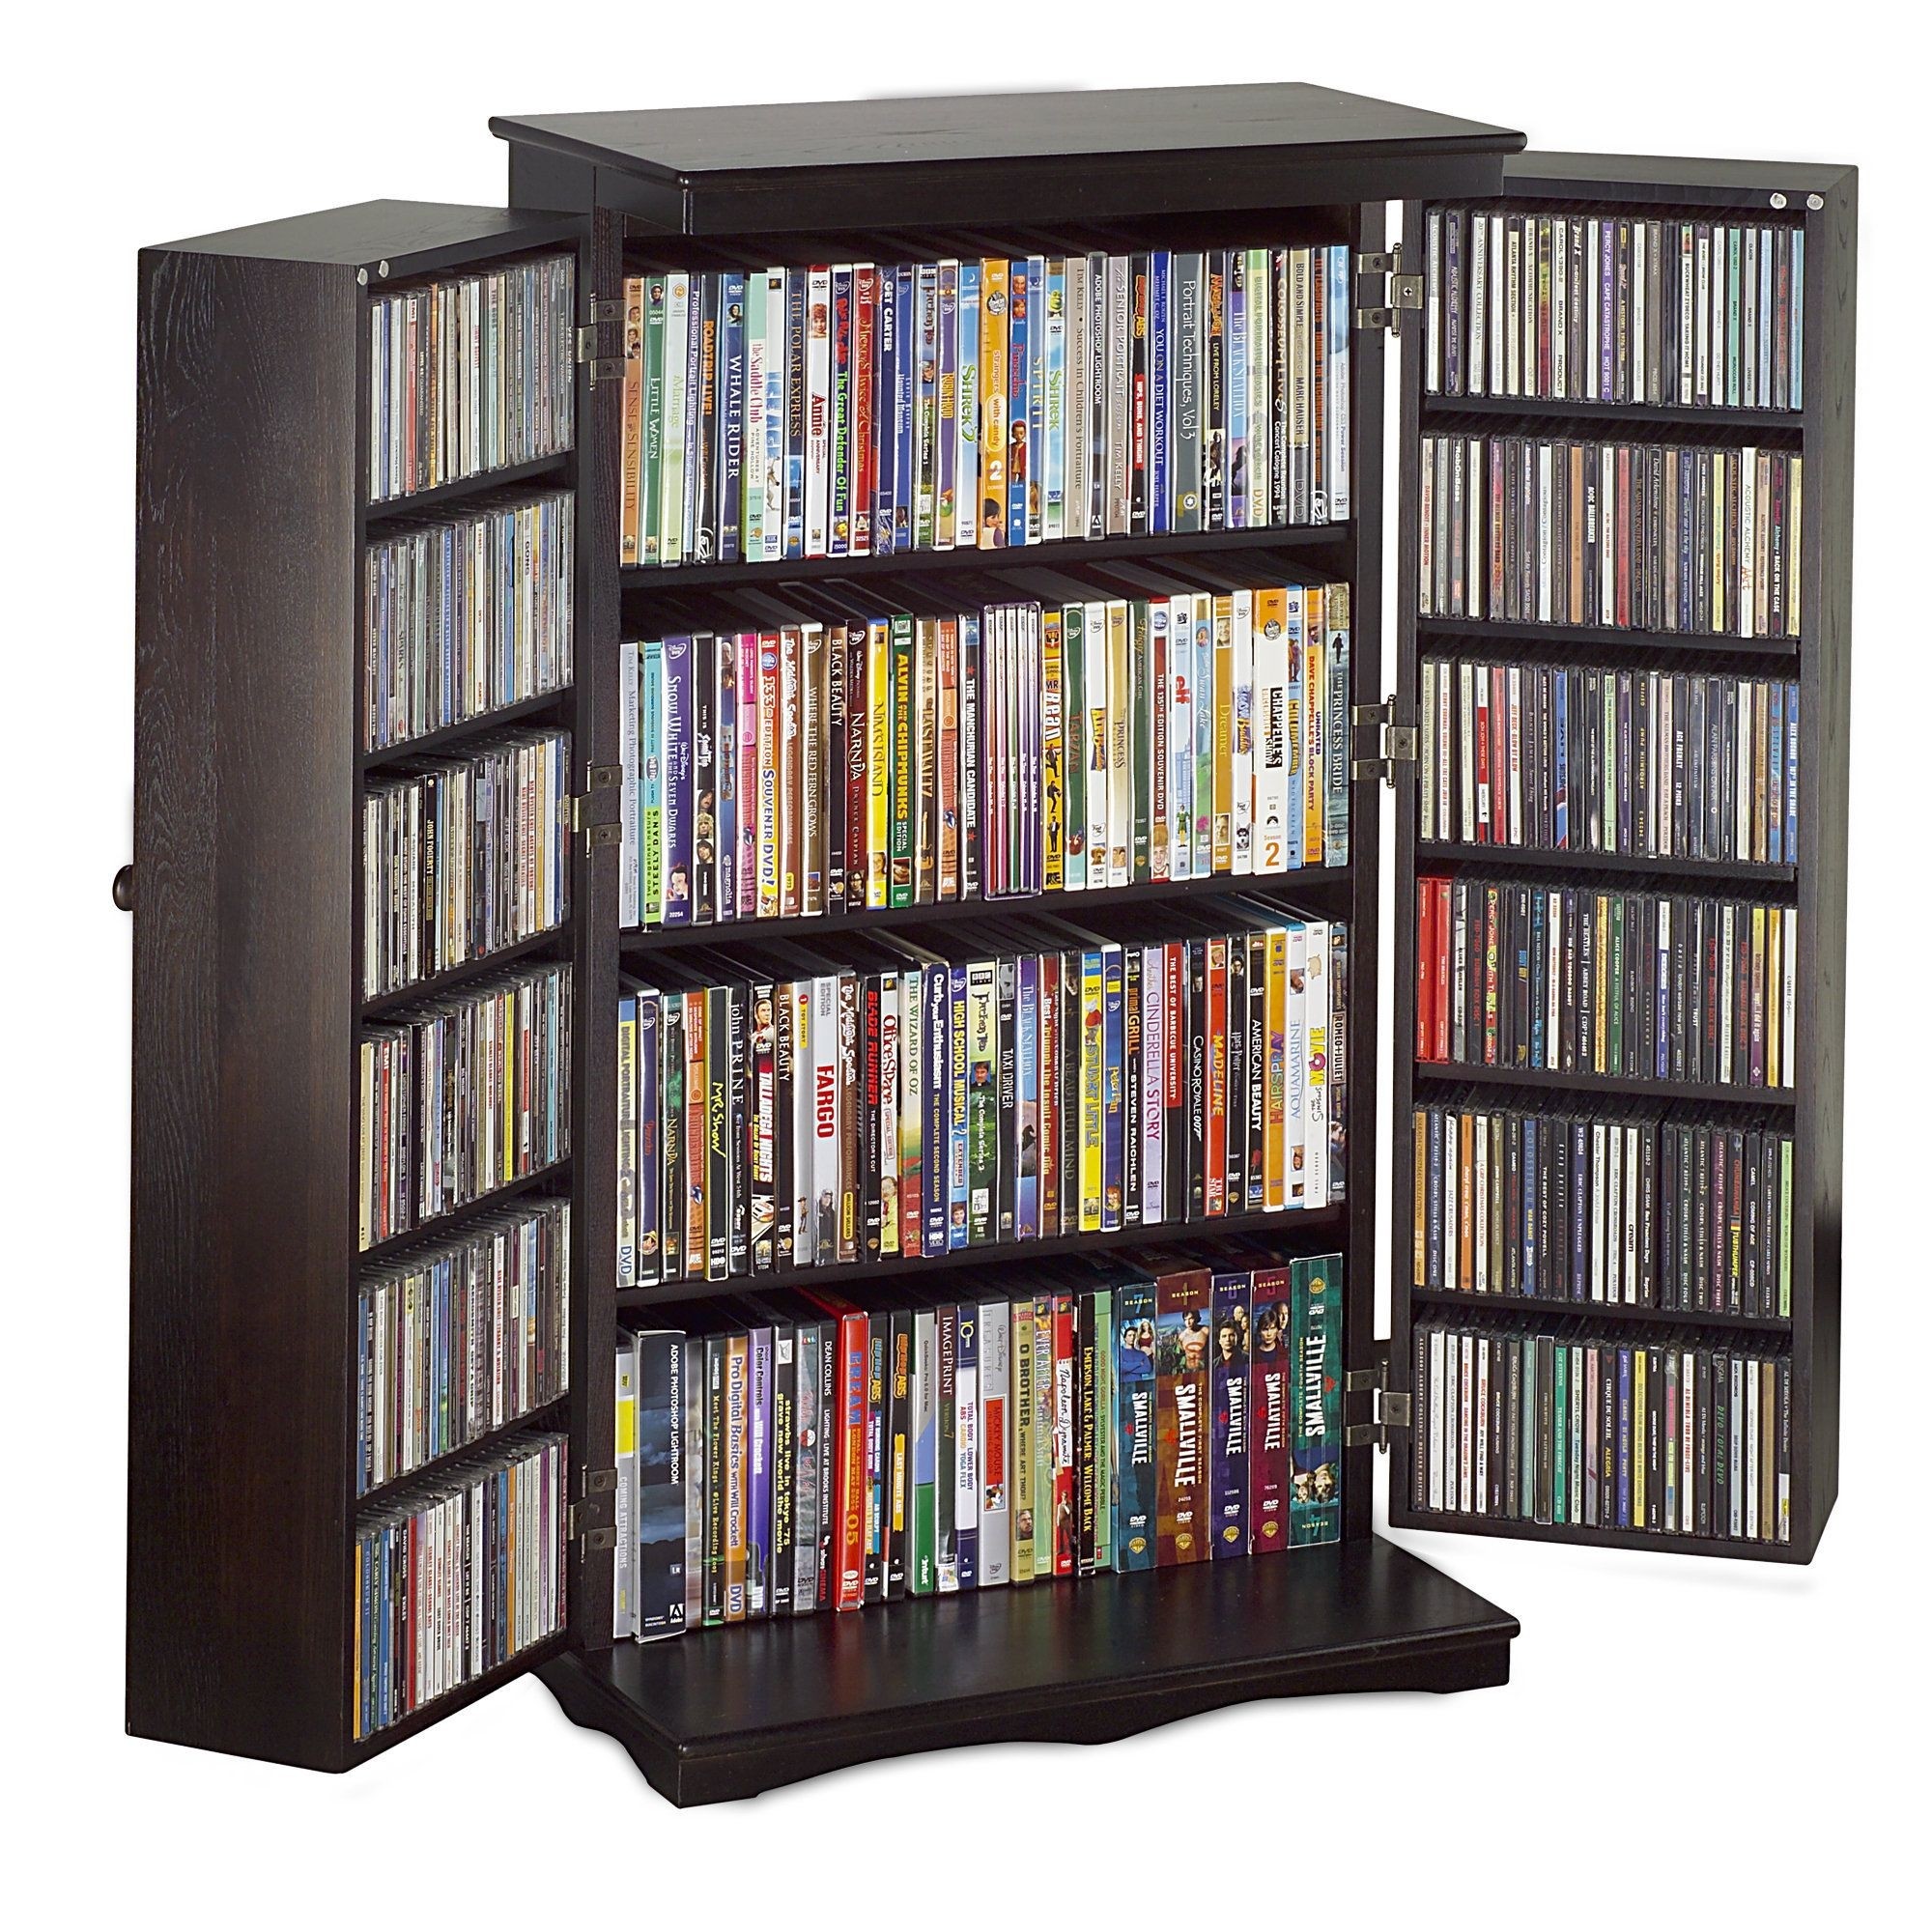 Mission music and movie cabinet from herrington open